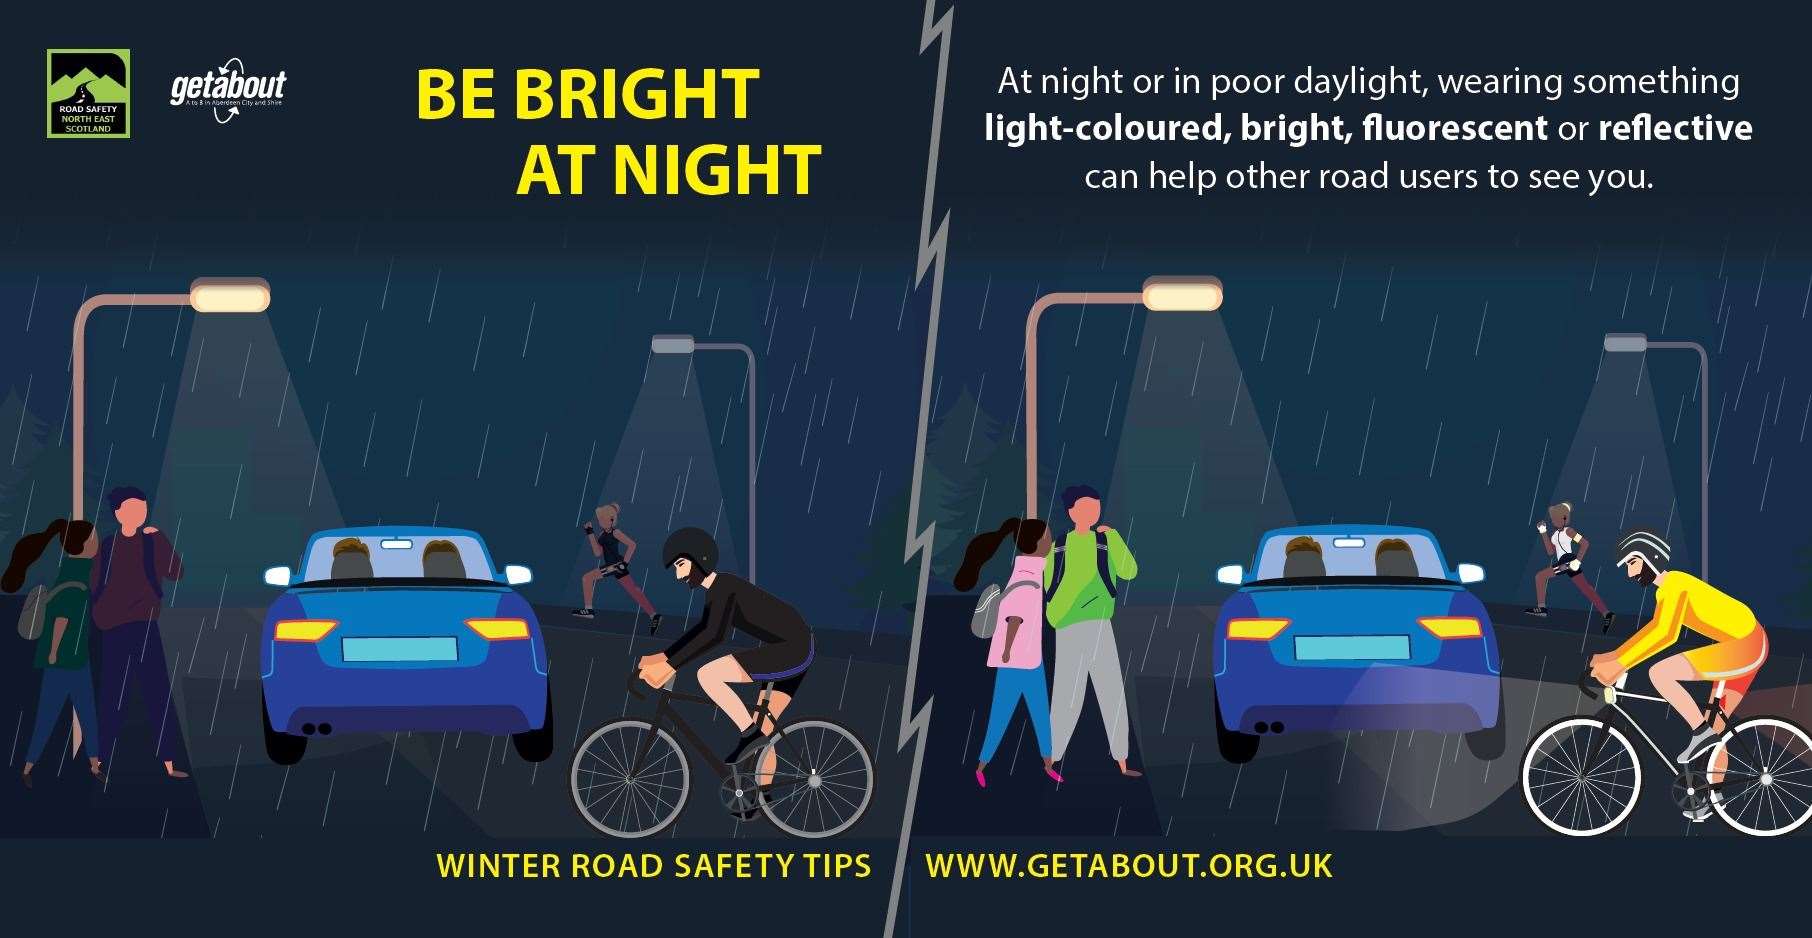 Wearing bright or reflective clothing could help save lives.